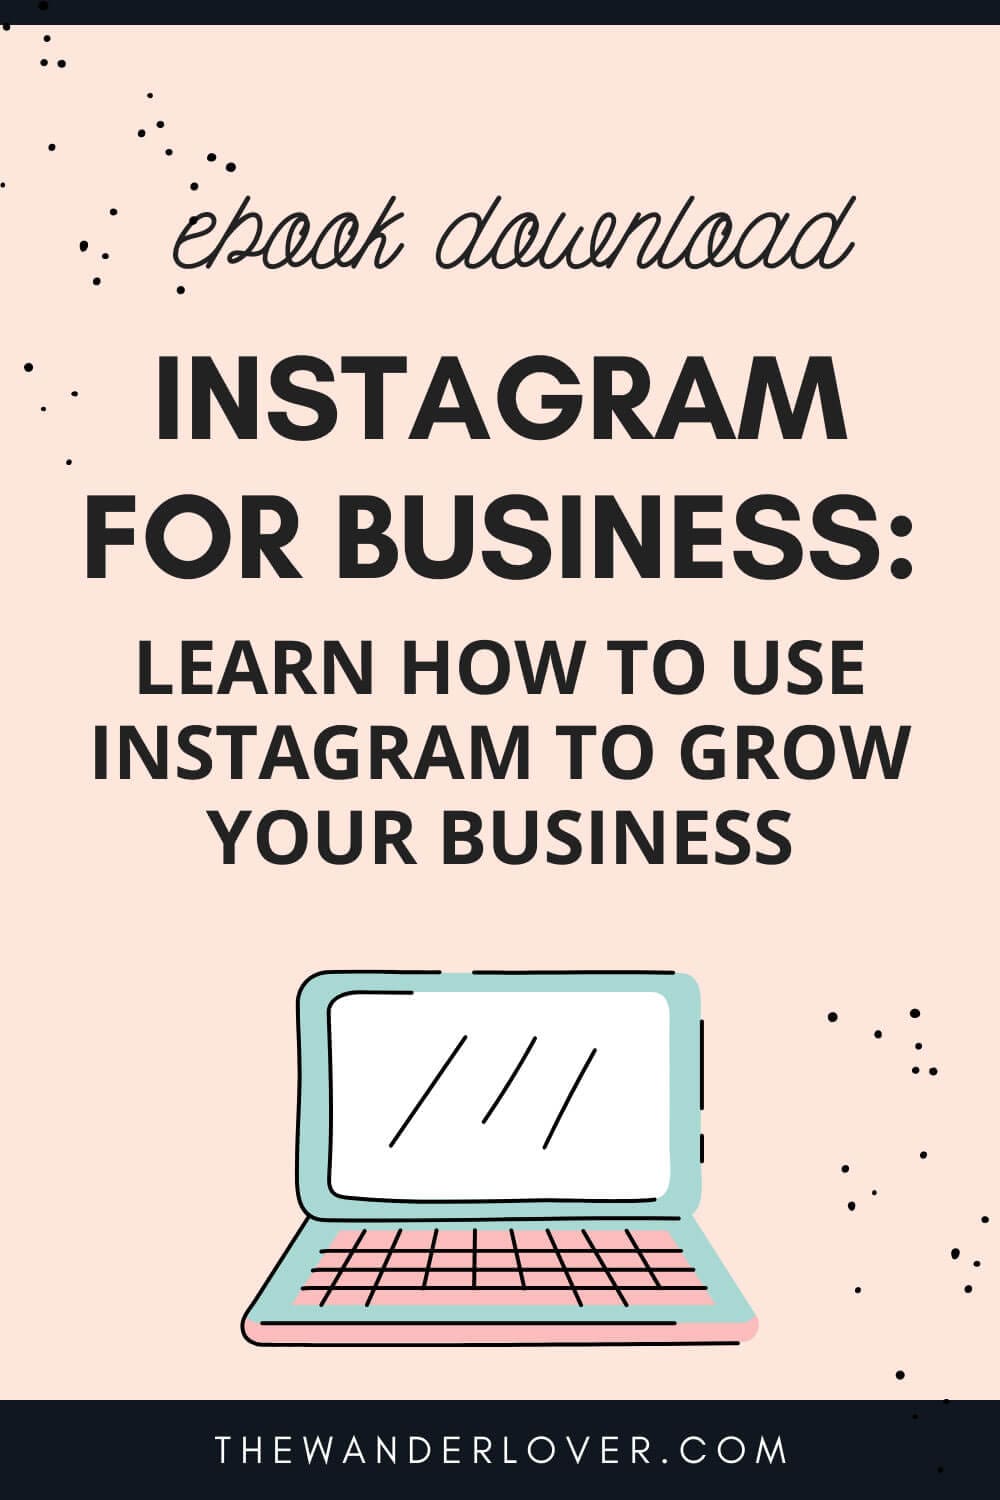 How to grow your business on Instagram | Instagram for business